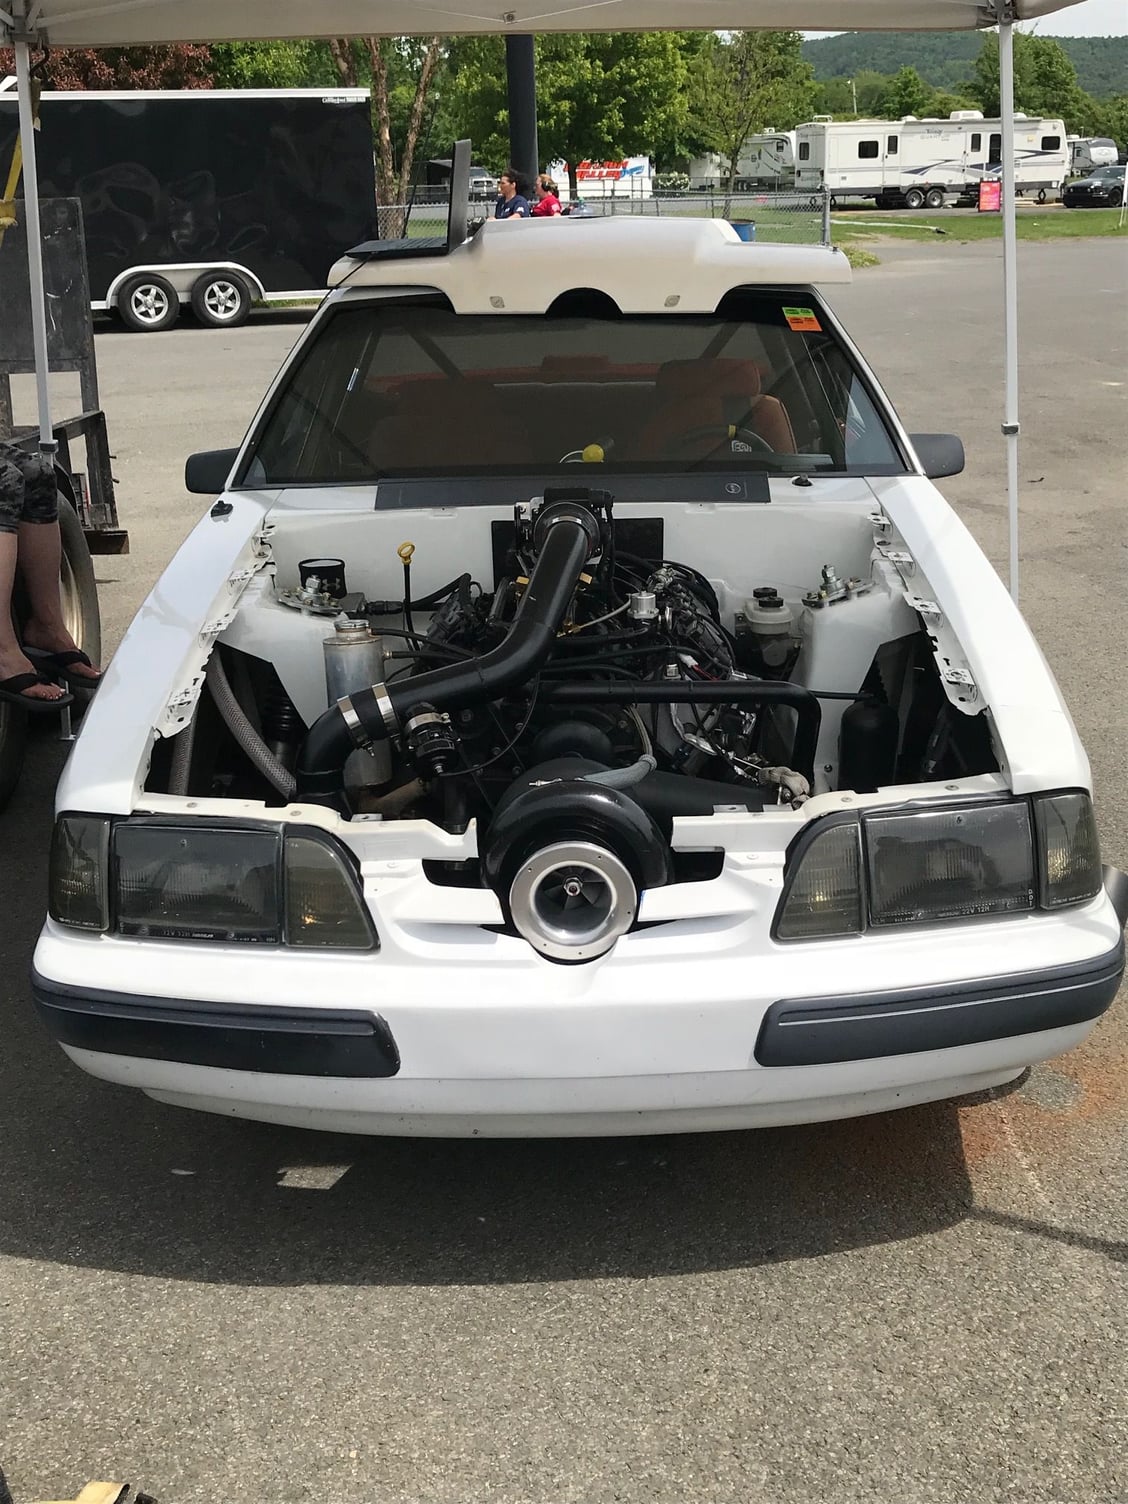 1989 Ford Mustang - Turbo LSX mustang - 8 sec street car - Used - VIN 12345678911112345 - 80,000 Miles - Ellington, CT 06029, United States